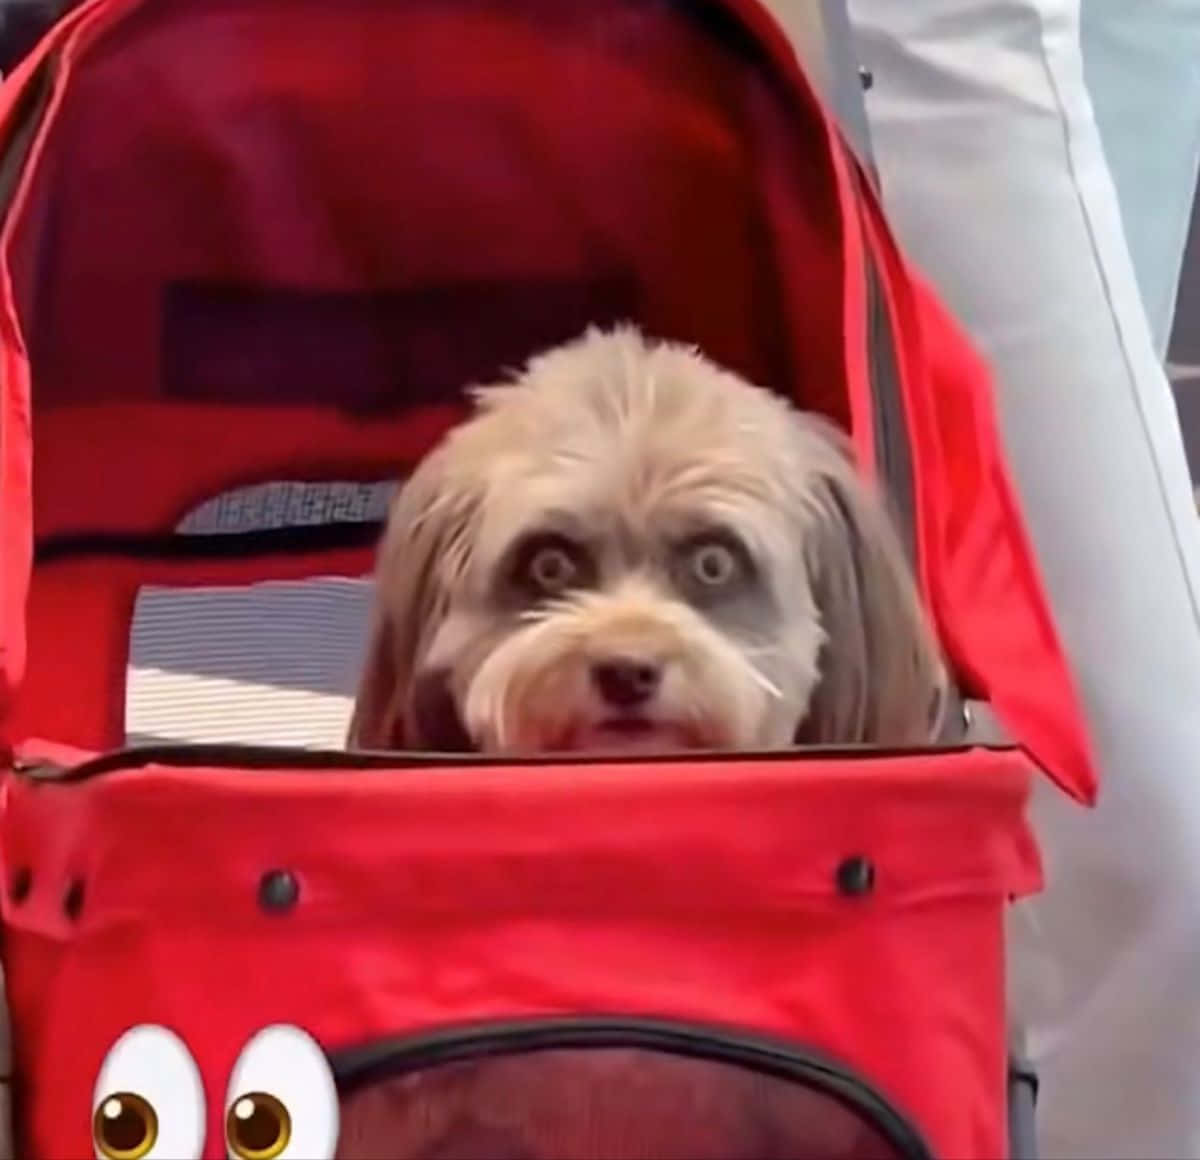 Goofy Ahh Funny Dog In Stroller Picture